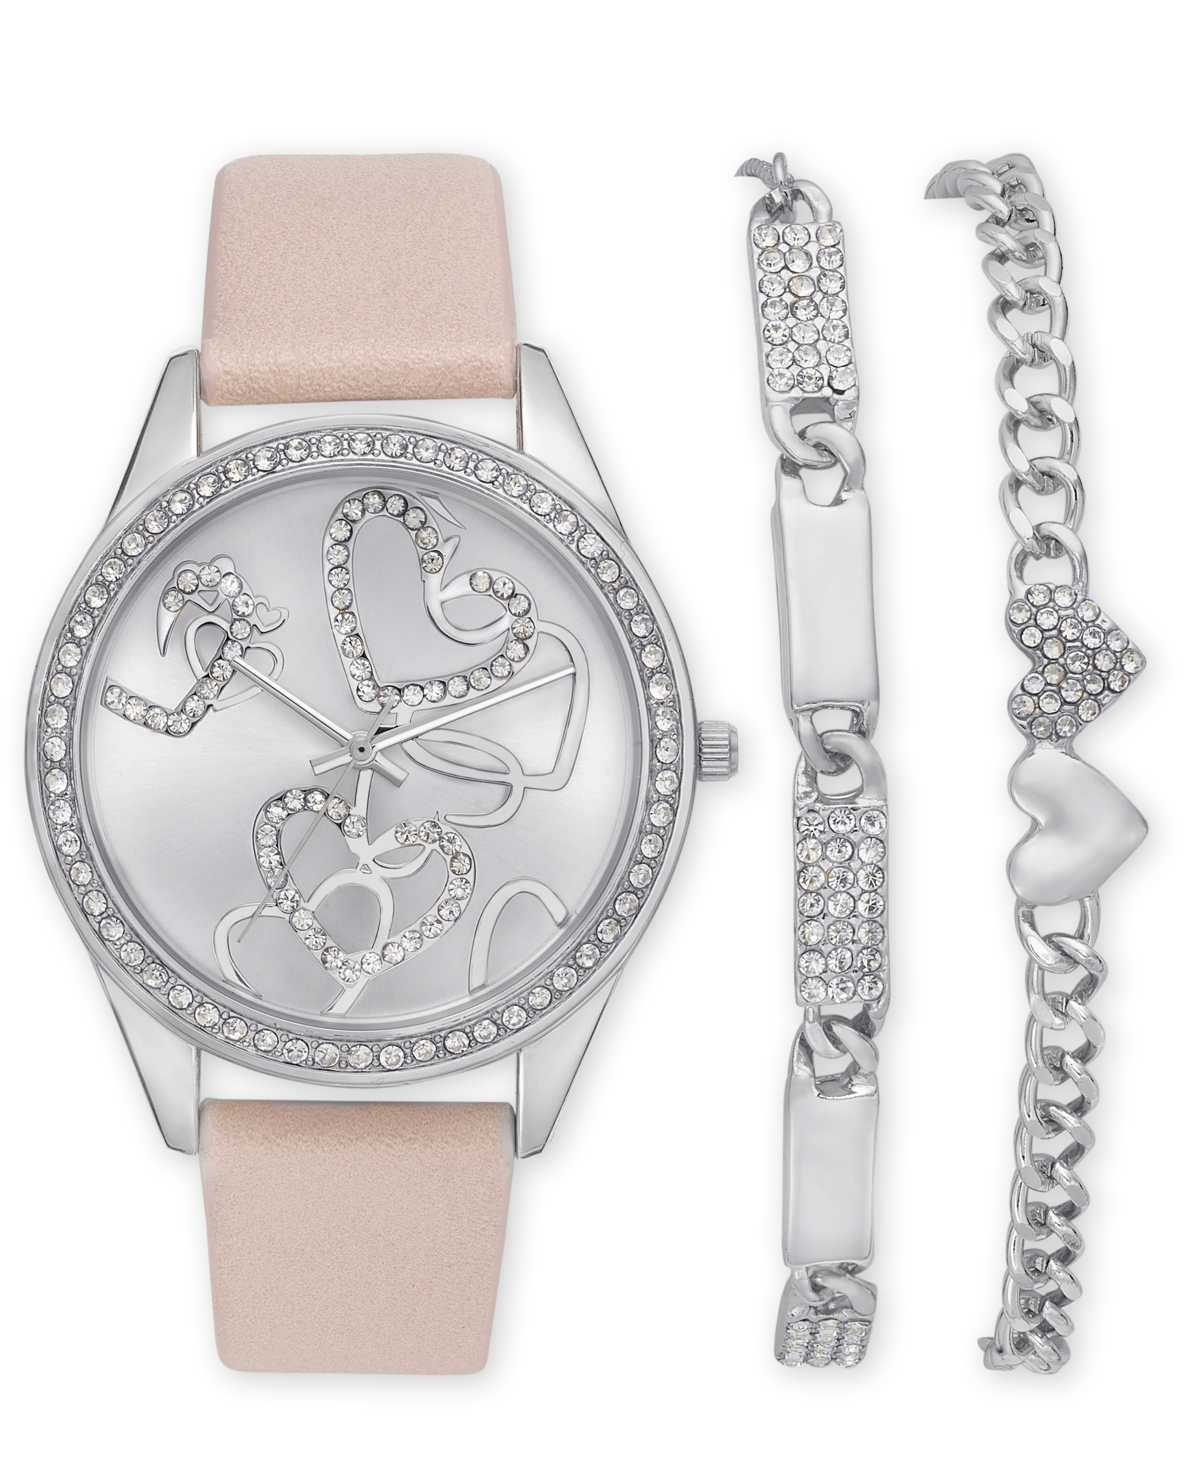 Women's Pink Strap Watch 39mm Gift Set, Created for Macy's - Pink